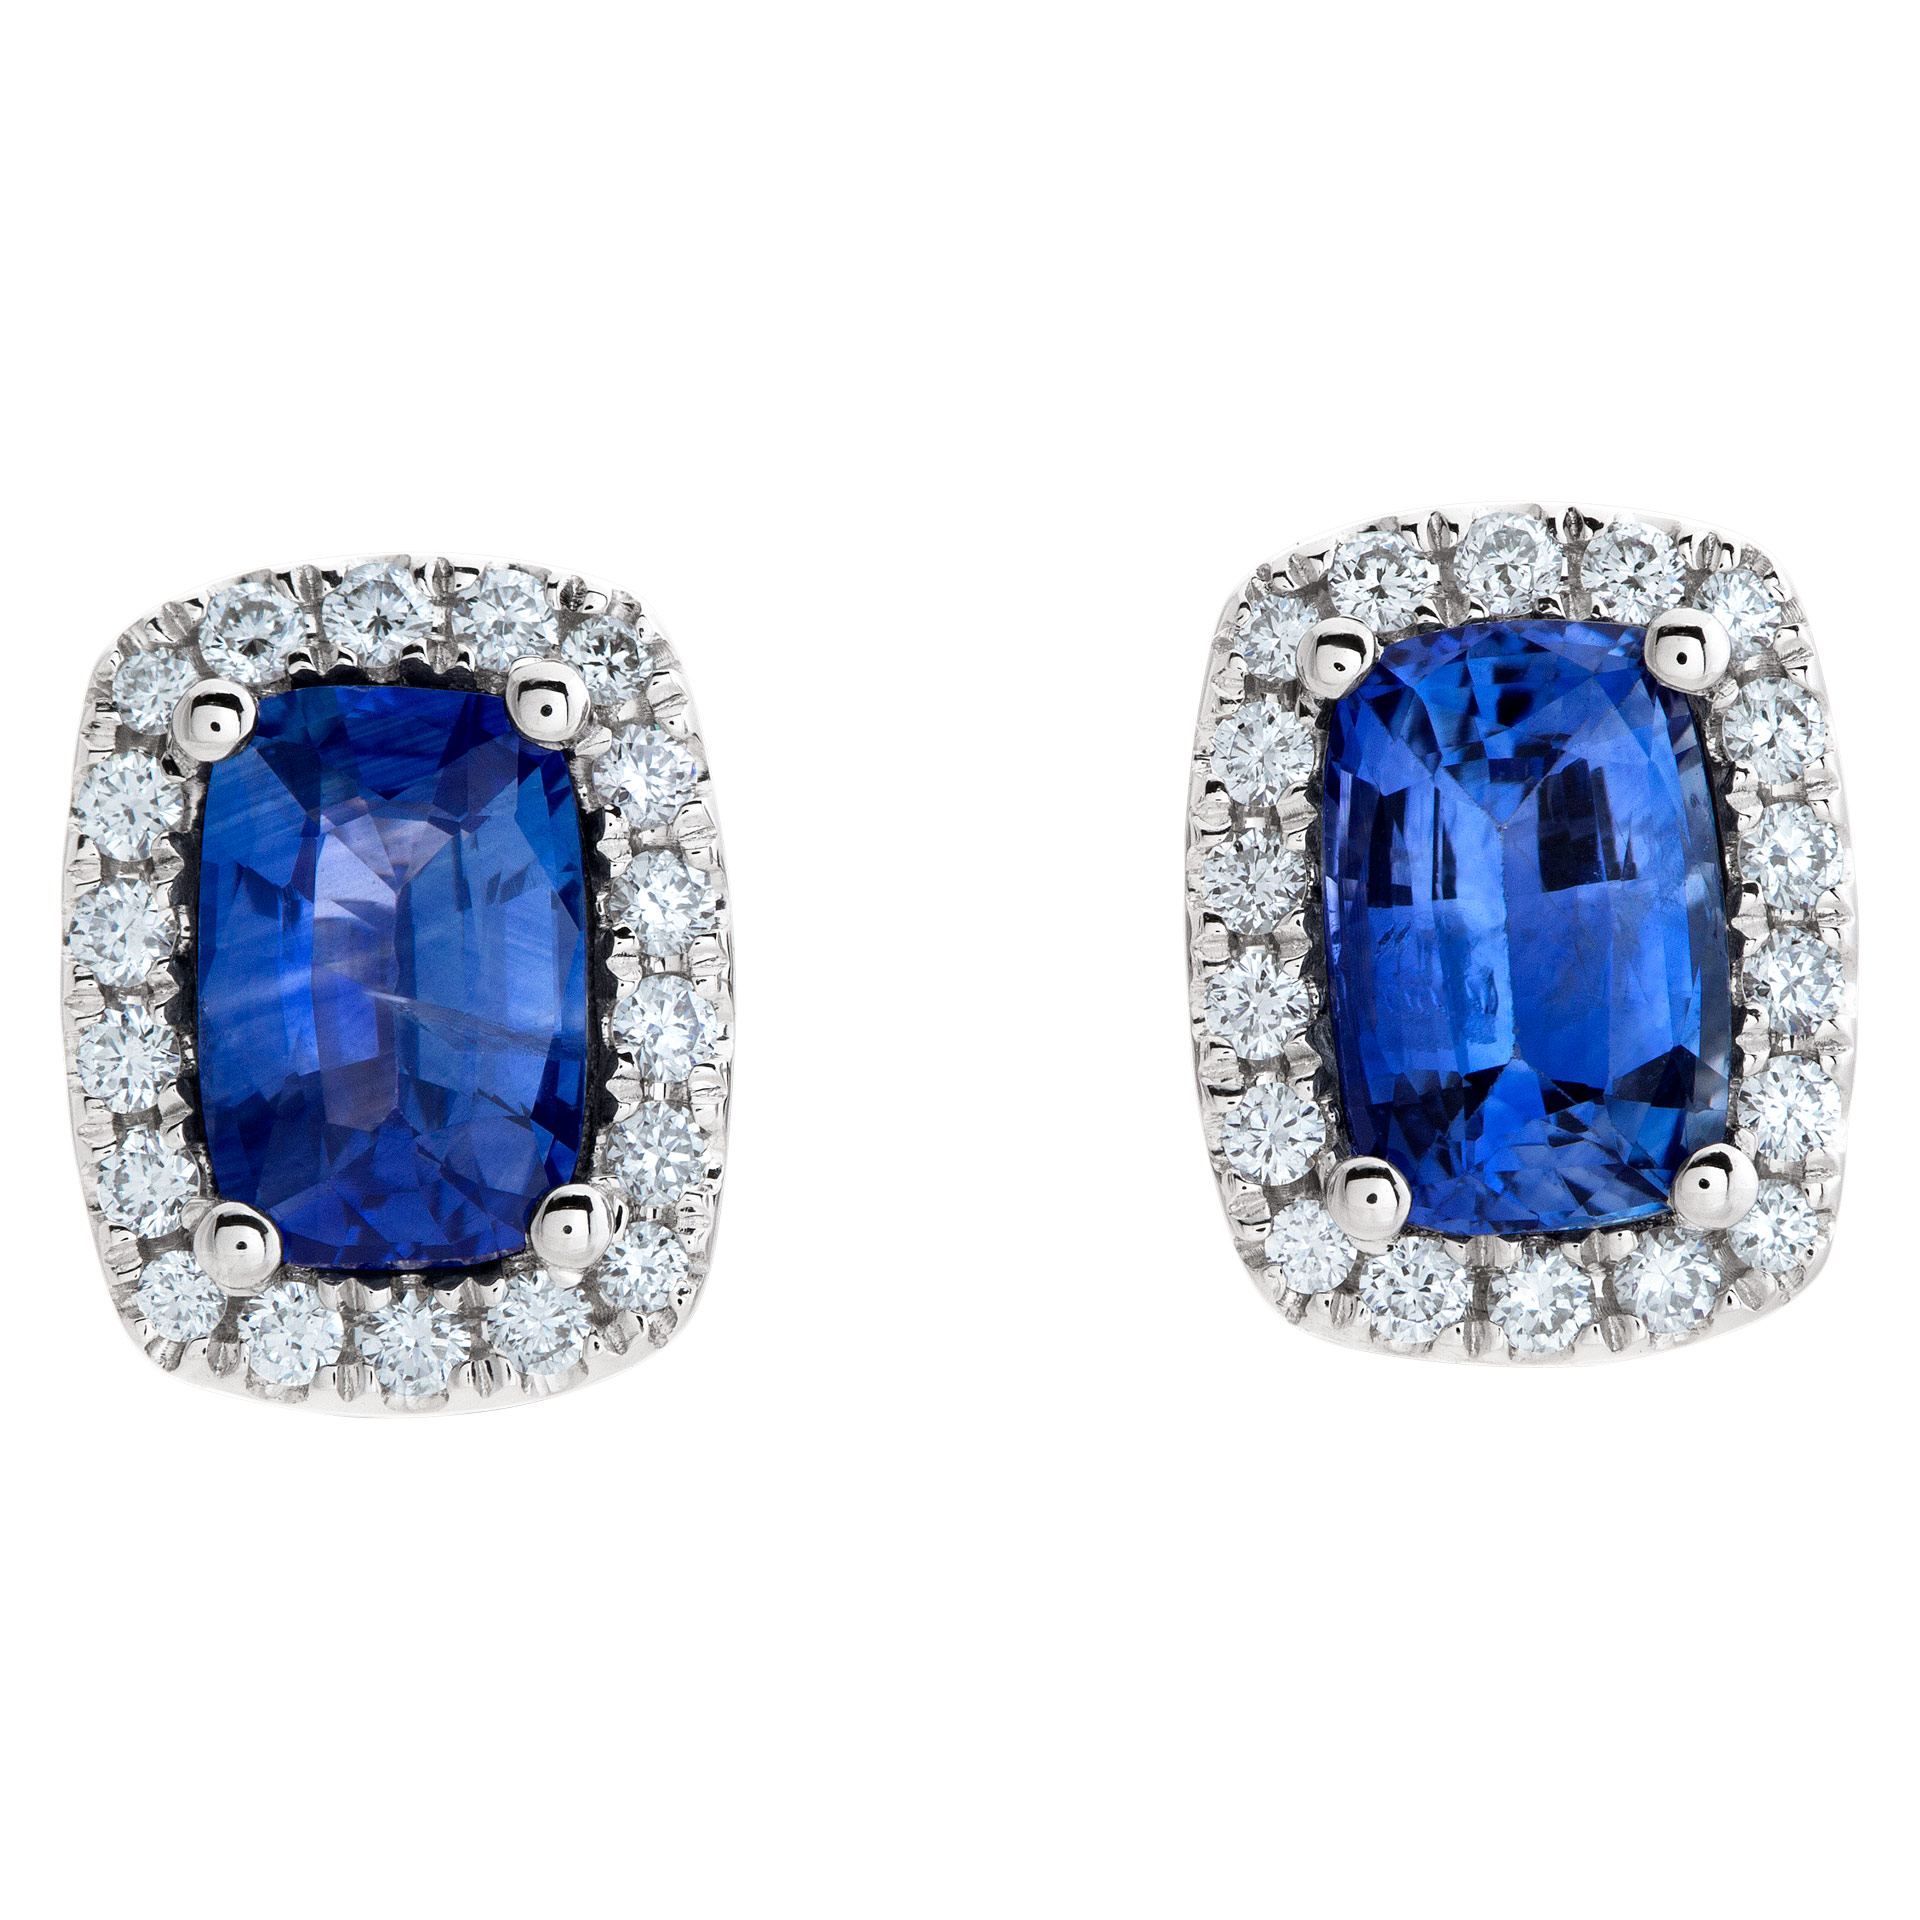 18k white gold stud earrings with 2.25 carats in blue sapphires and 0.31 carat in diamonds